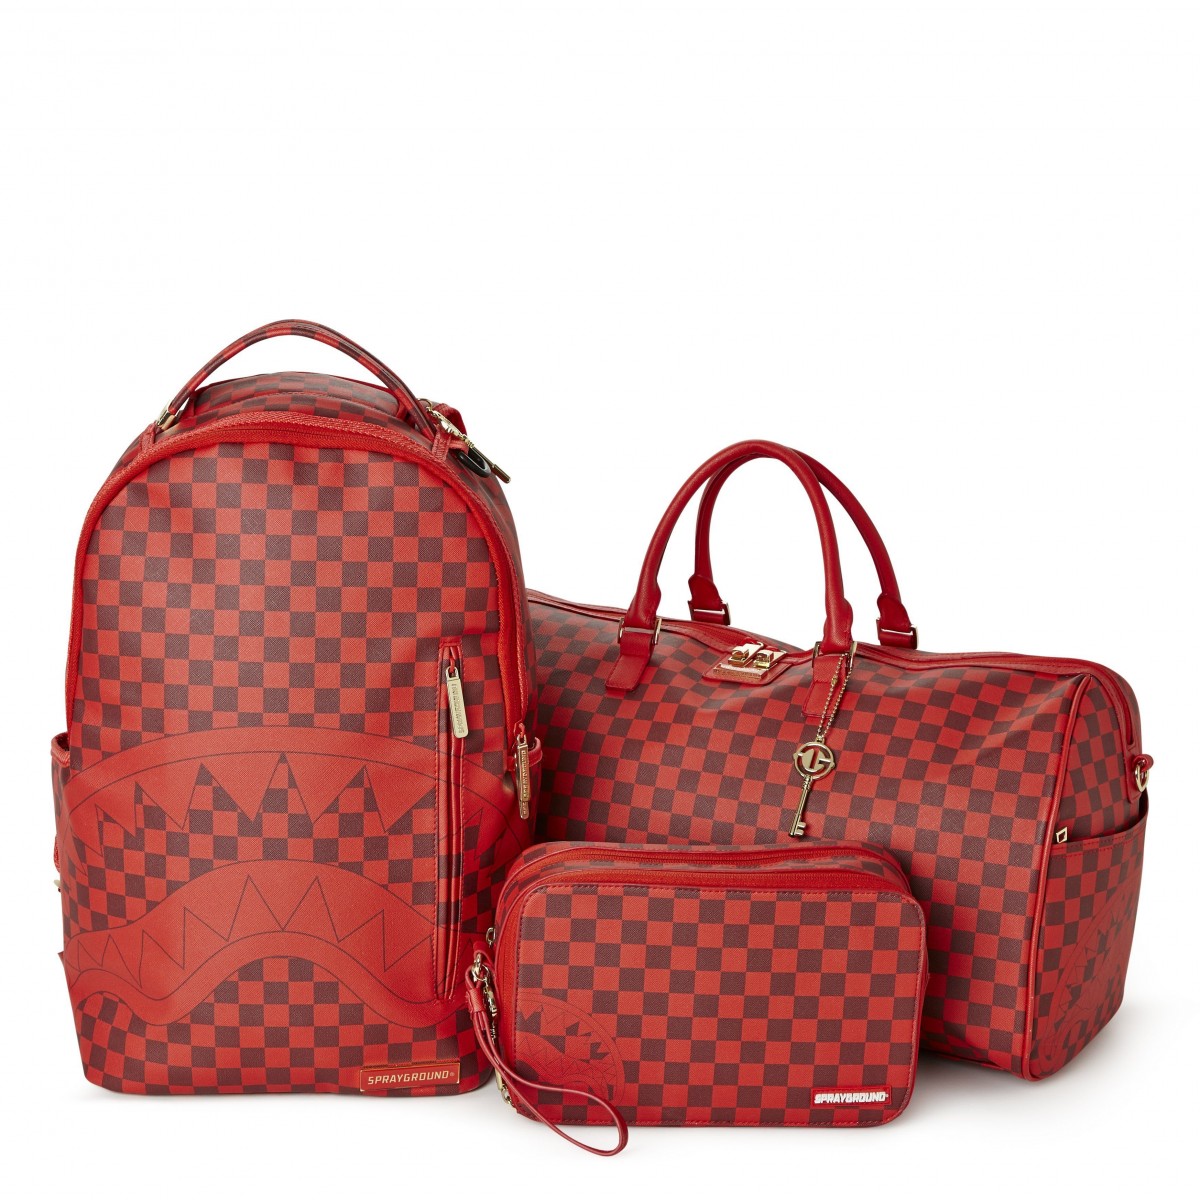 Discount | SHARKS IN PARIS DUFFLE (RED CHECKERED EDITION) Sprayground Sale - Discount | SHARKS IN PARIS DUFFLE (RED CHECKERED EDITION) Sprayground Sale-01-9